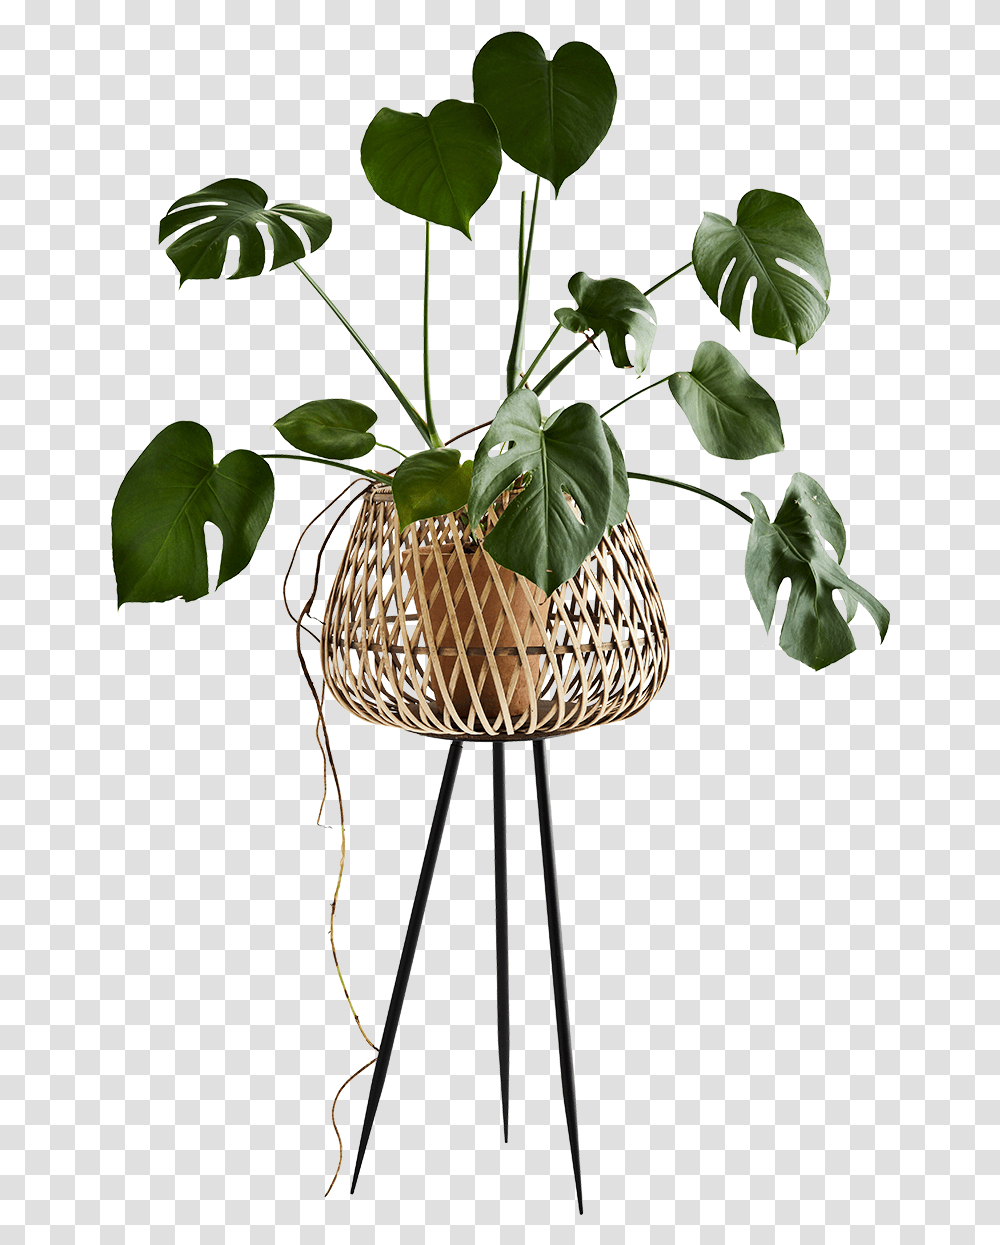 Bamboo Flower Stand Bamboo Full Size Download Seekpng Bamboo Flower Stand, Vase, Jar, Pottery, Potted Plant Transparent Png